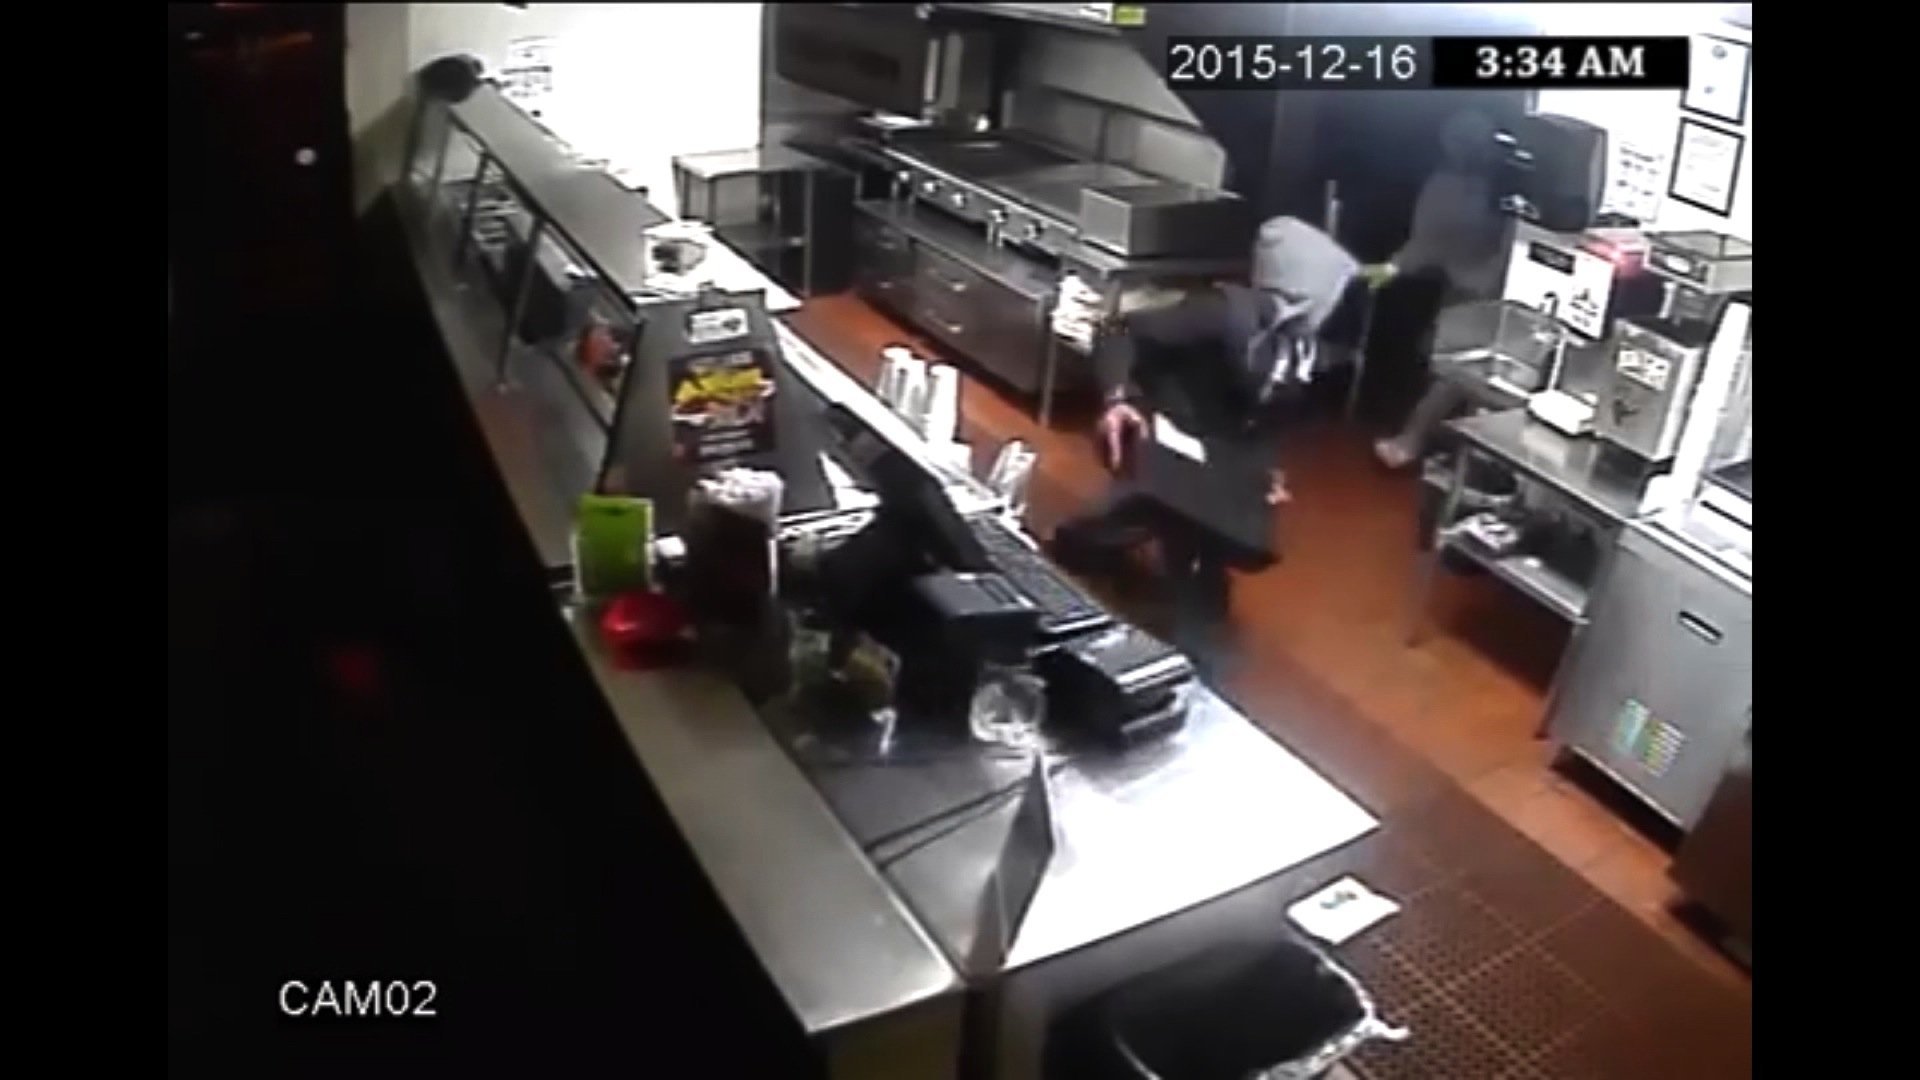 Security footage shows three men breaking into a closed taco restaurant in Las Vegas, Nevada, on December 16, 2015. The restaurant turned the robbery video into a commercial.